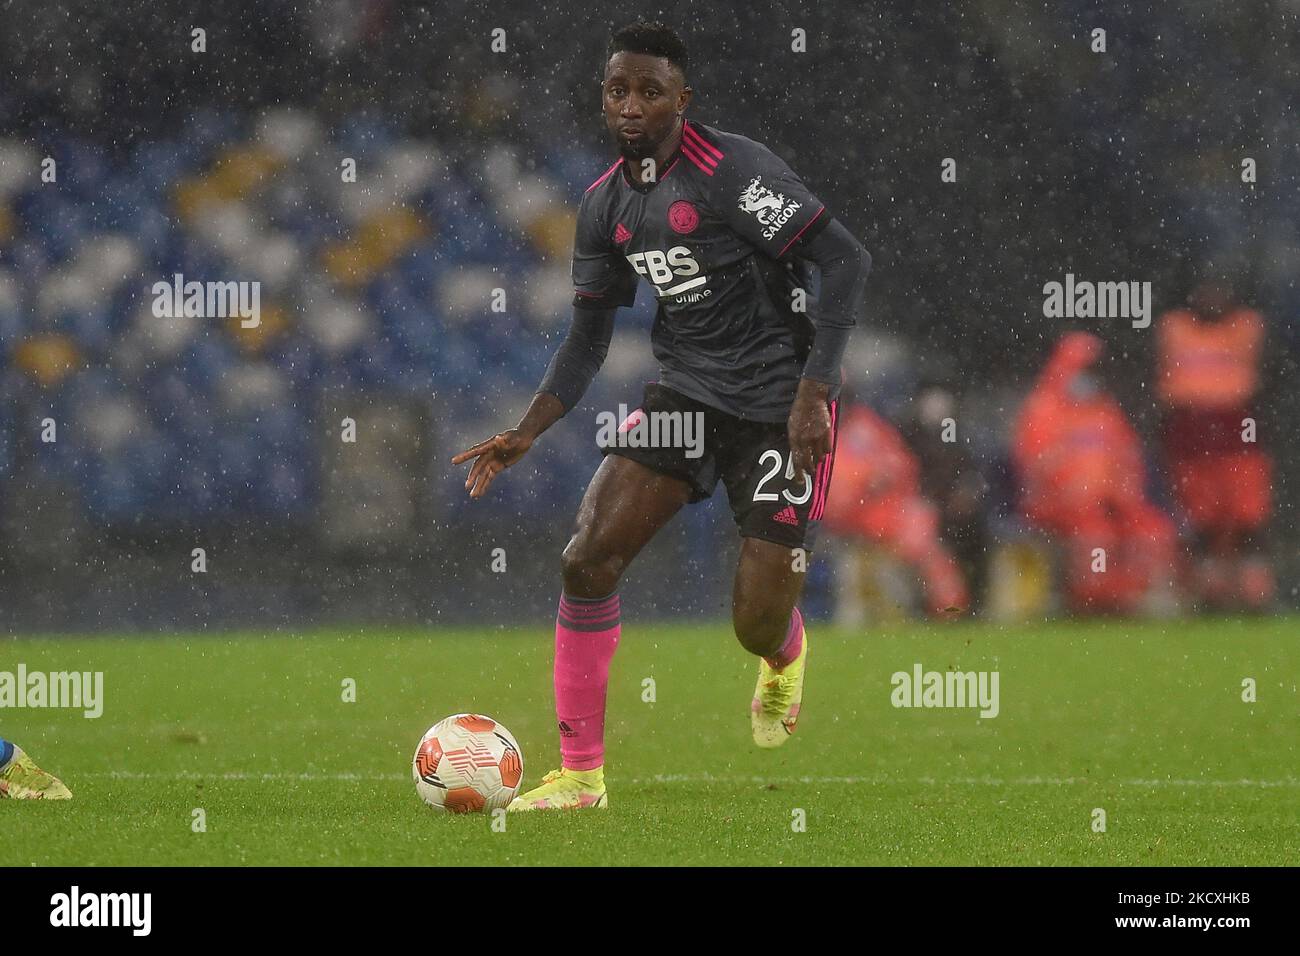 Wilfred Ndidi of Leicester City during the UEFA Europa League match between SSC Napoli and Leicester City at Stadio Diego Armando Maradona Naples Italy on 9 December 2021. (Photo by Franco Romano/NurPhoto) Stock Photo